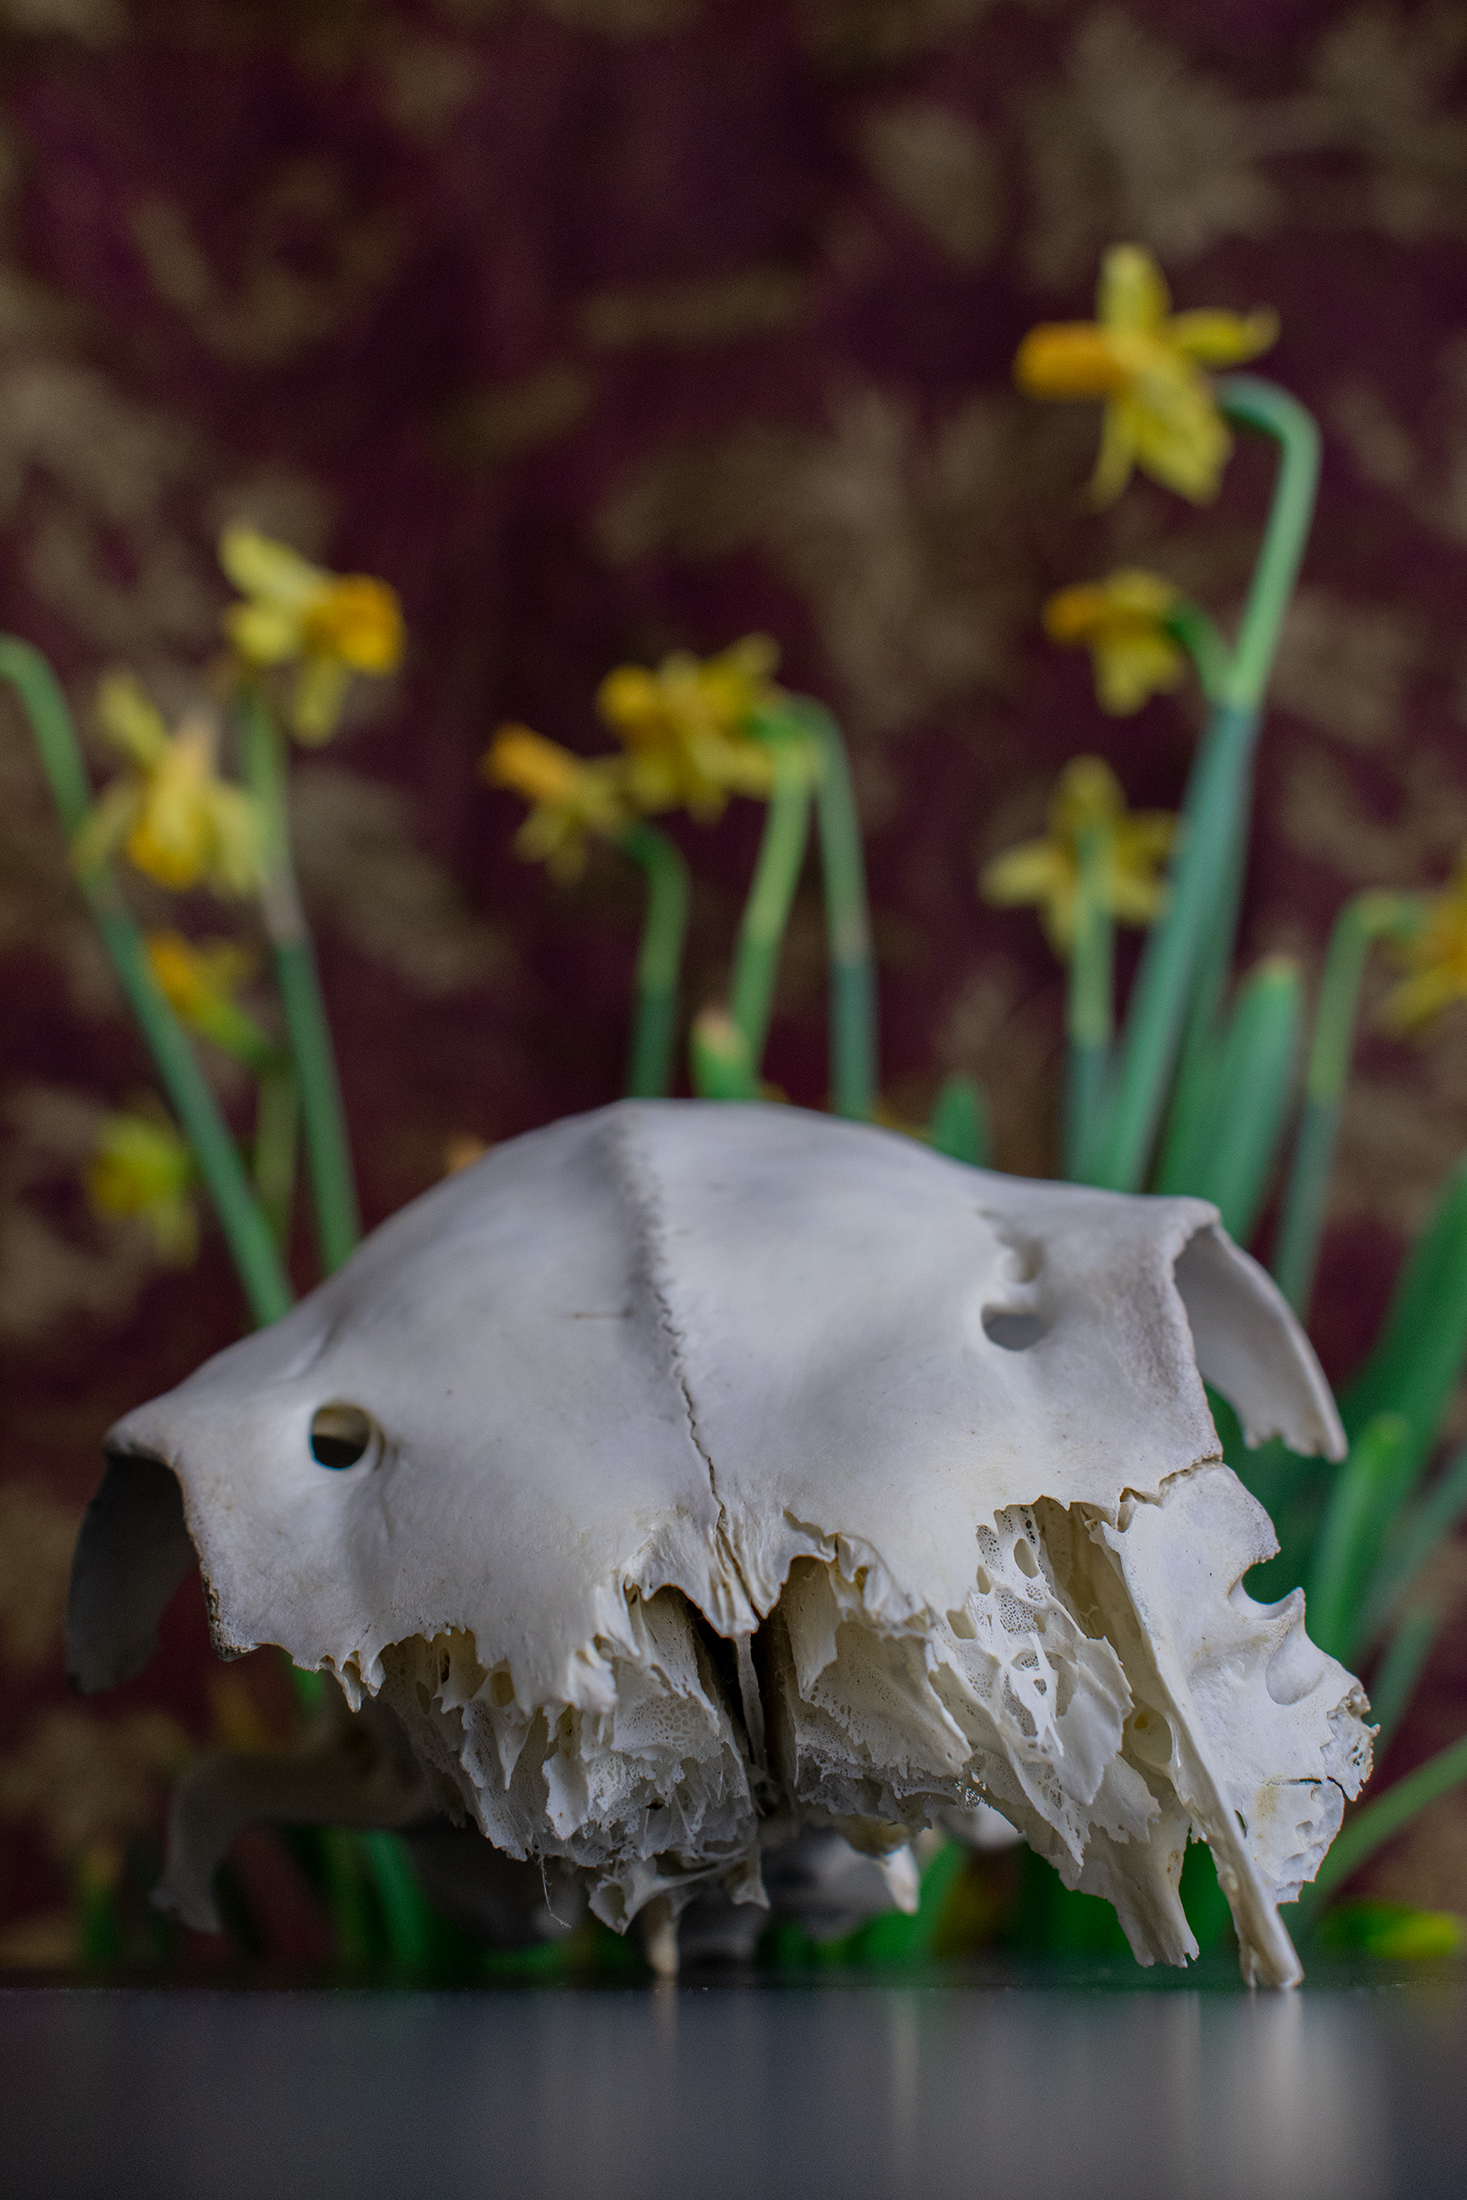 A still life photograph featuring the top of a bleached animal skull in front of a bunch of vibrant yellow dandelions. The backdrop is burgundy and gold.